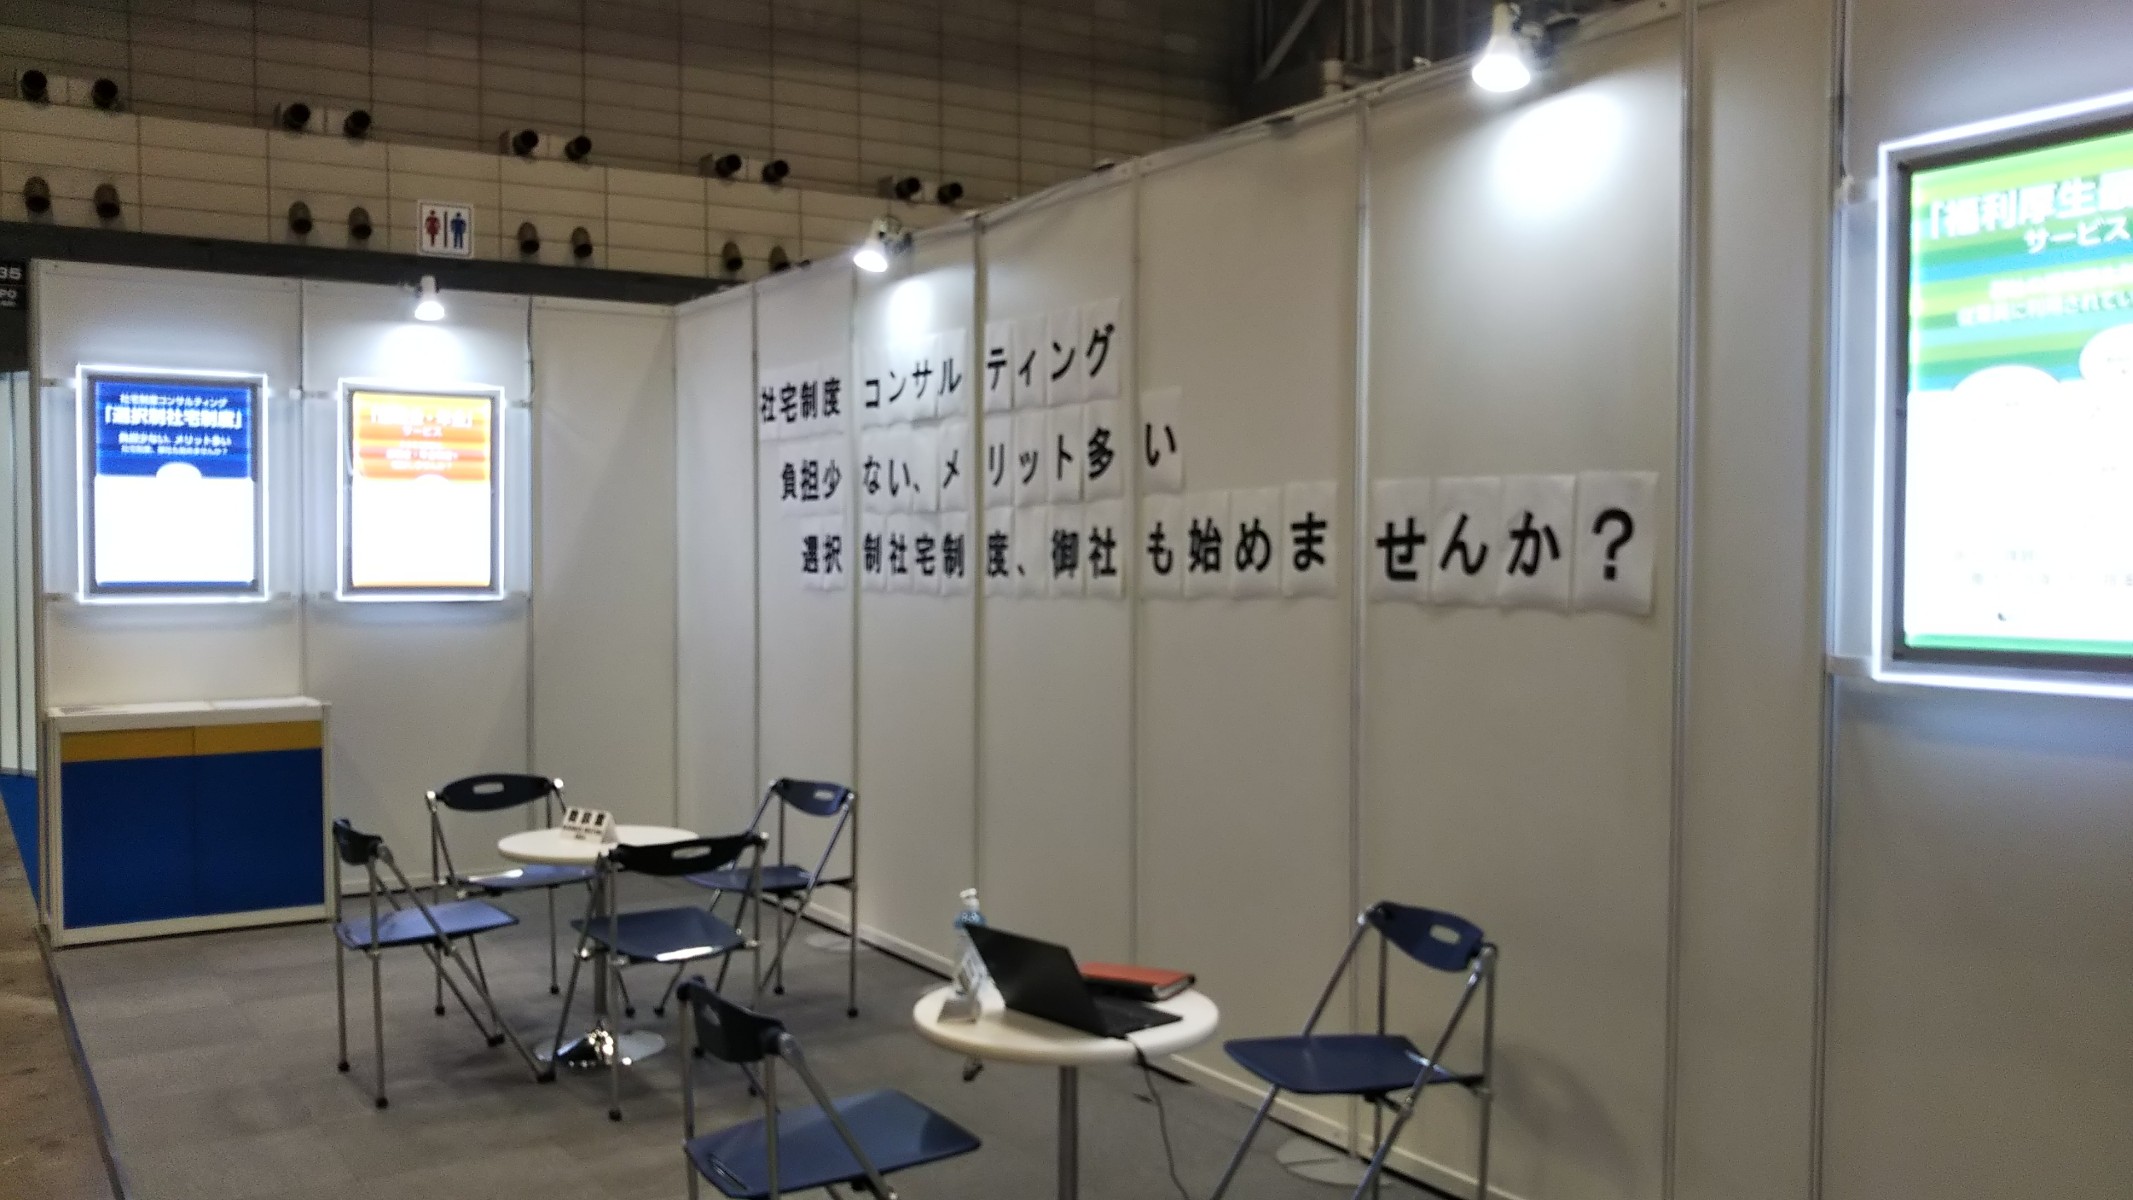 HREXPO3 - 第8回 HR EXPO に出展しました！